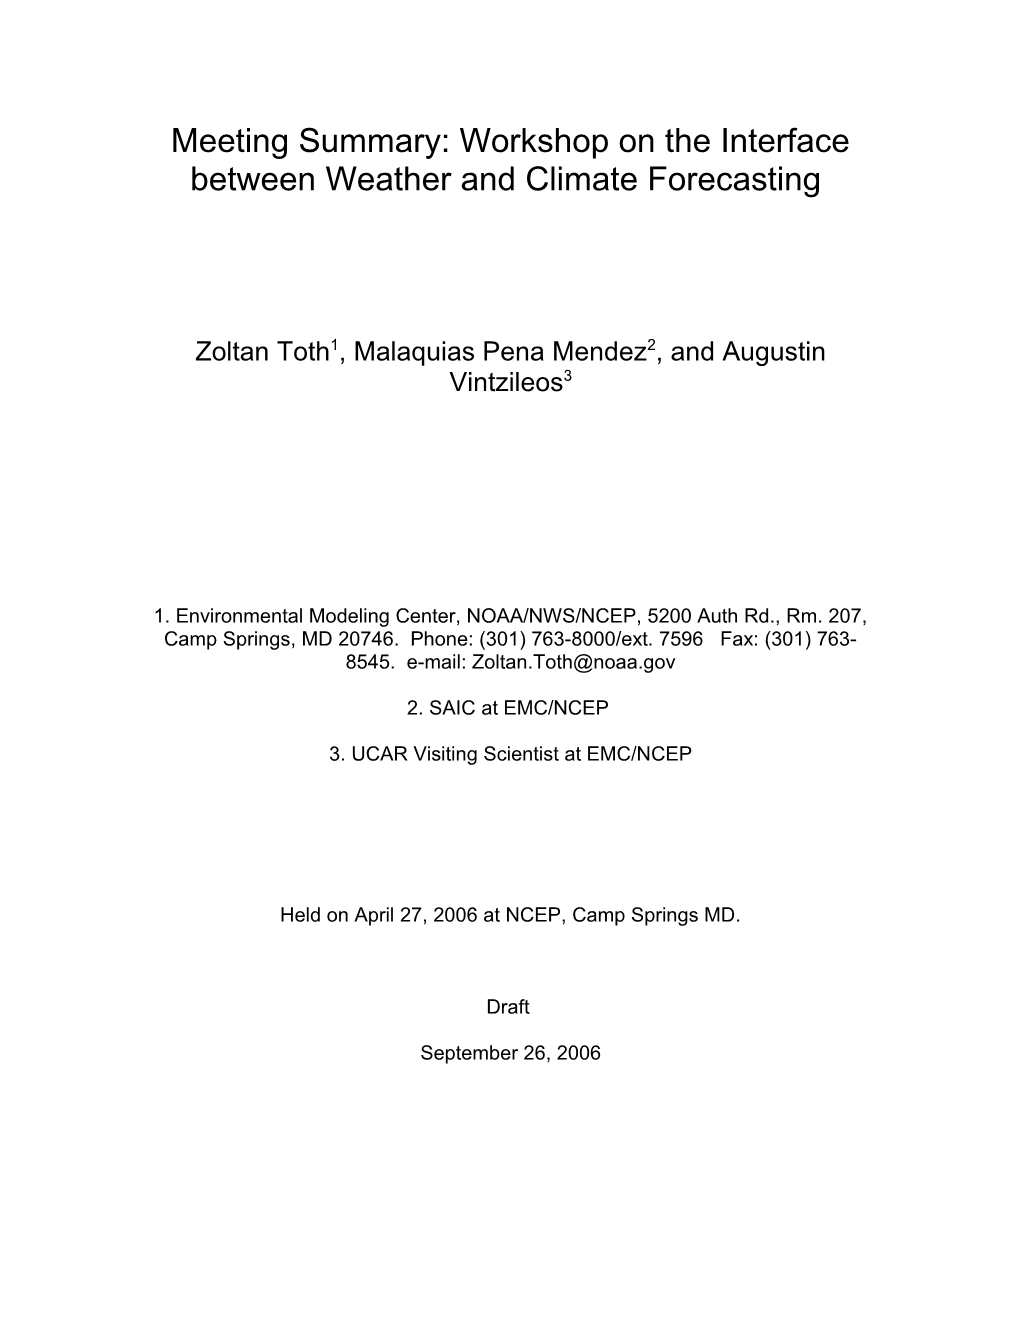 Meeting Summary: Workshop on the Interface Between Weather and Climate Forecasting